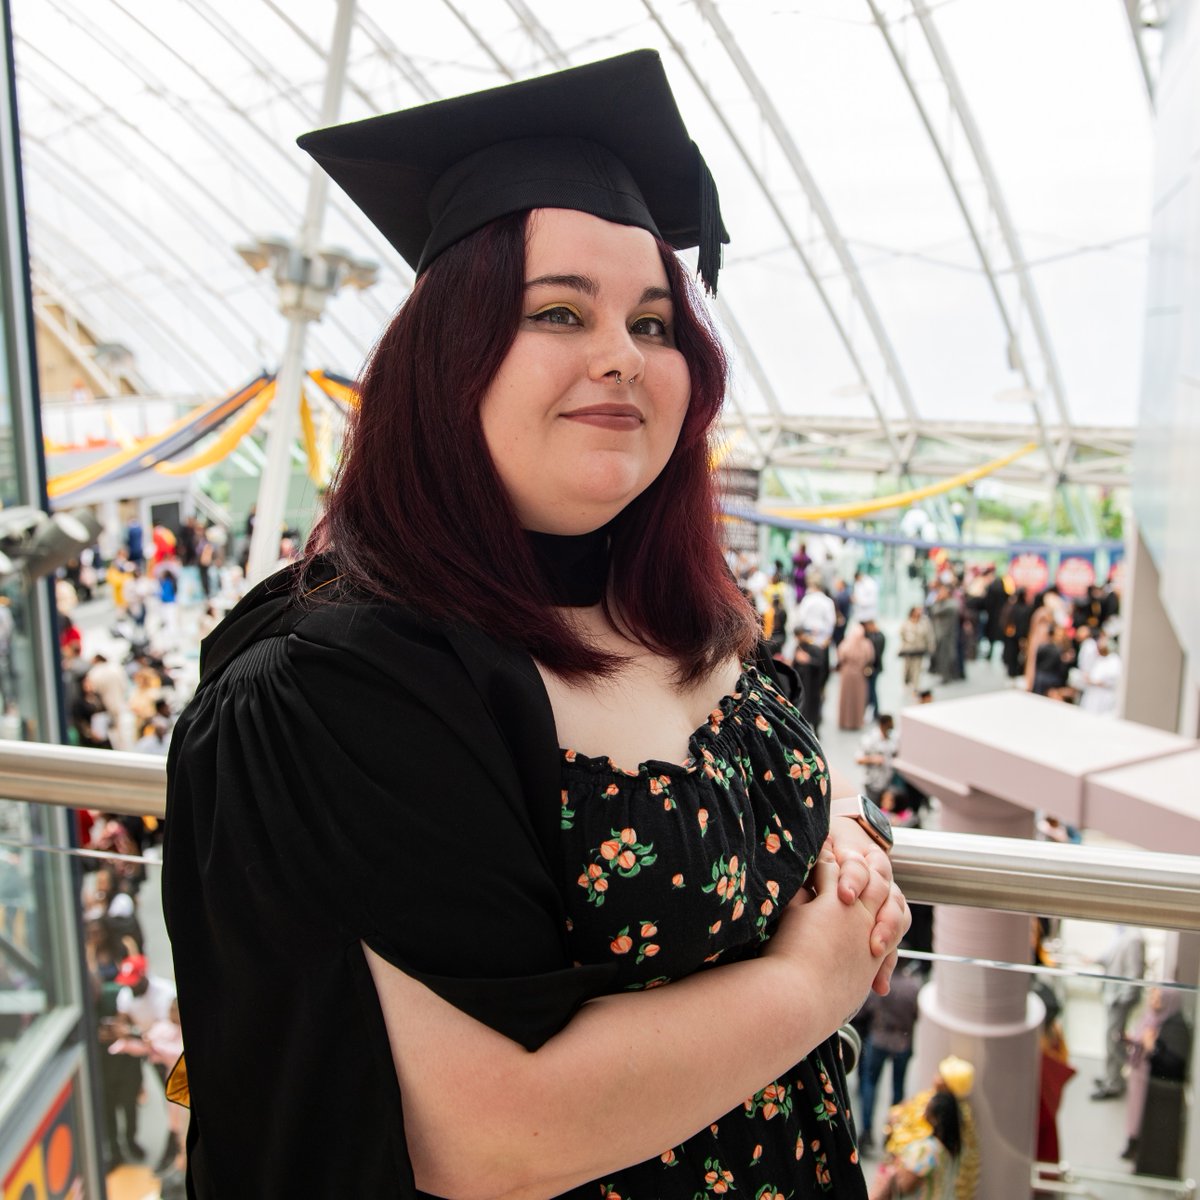 'Had I known I was dyslexic years ago, where could I have been now?' This week, thanks to the right support, Aimee graduated with a degree in Criminology from the University of Bradford and now she’s set to study for a Master’s. This is Aimee's story: bit.ly/3QovEIz